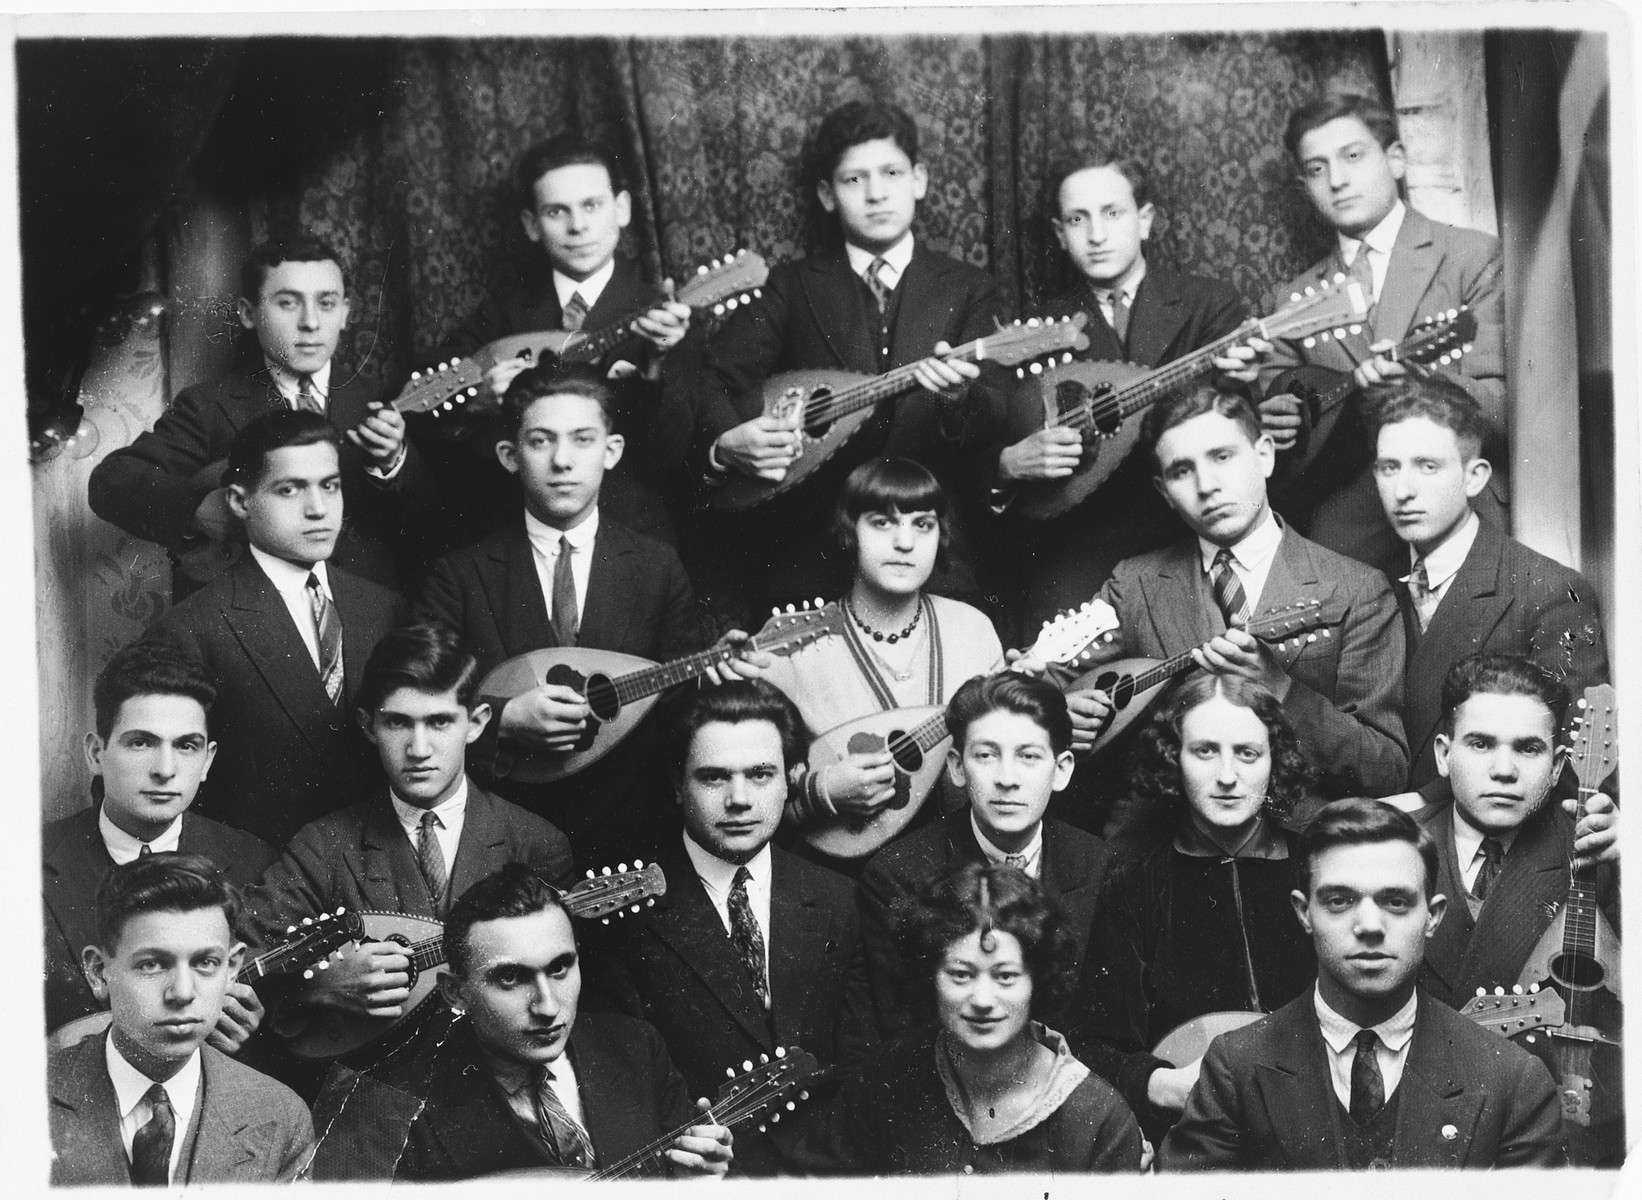 Group portrait of members of a Jewish youth movement mandolin band in Warsaw.  The young men and women belong to the Poale Zion Zionist youth movement.